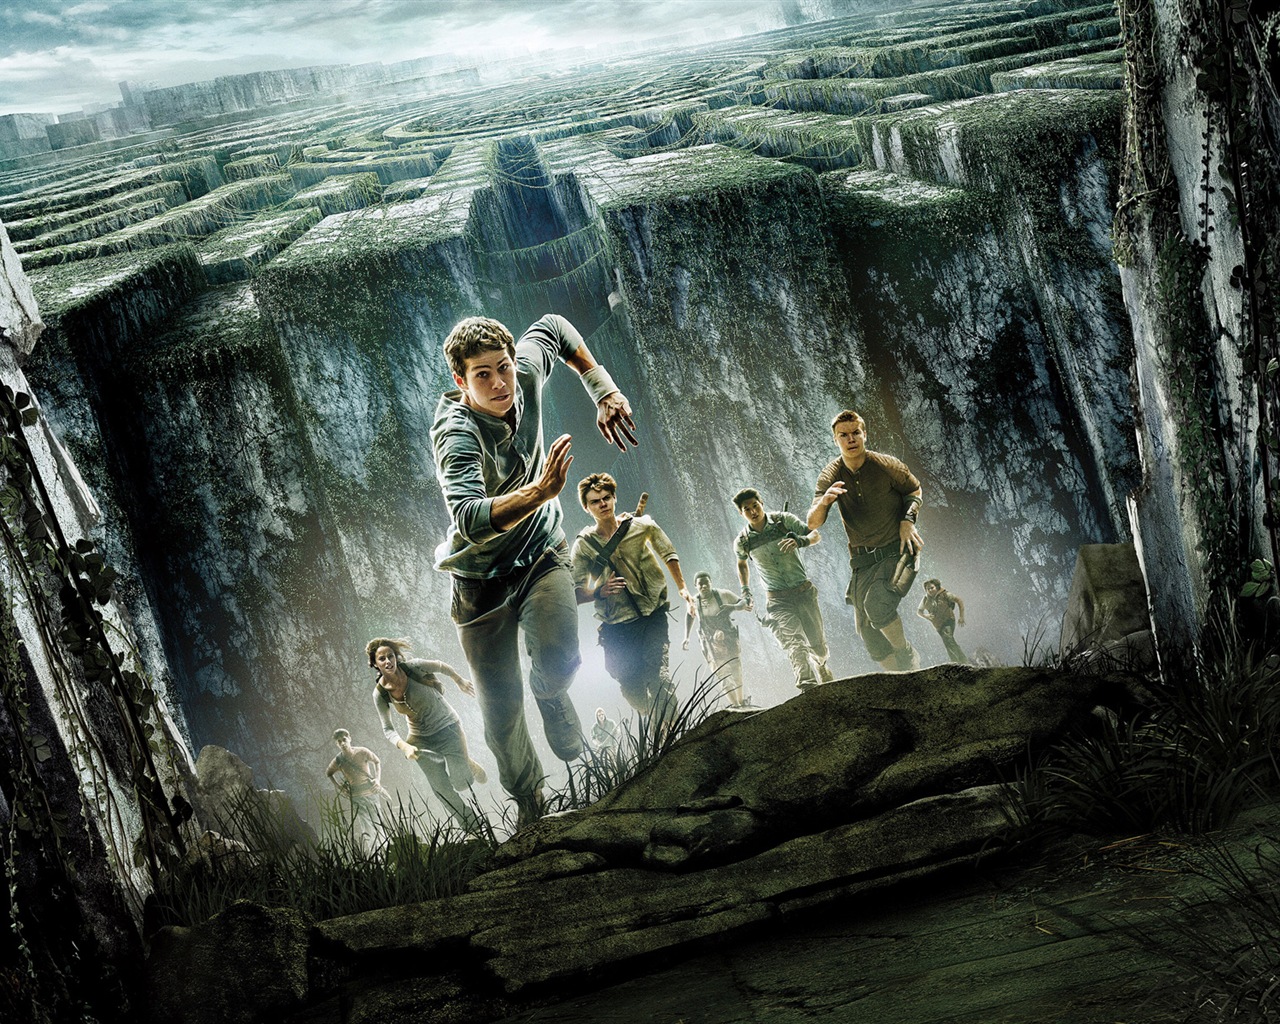 The Maze Runner HD movie wallpapers #6 - 1280x1024